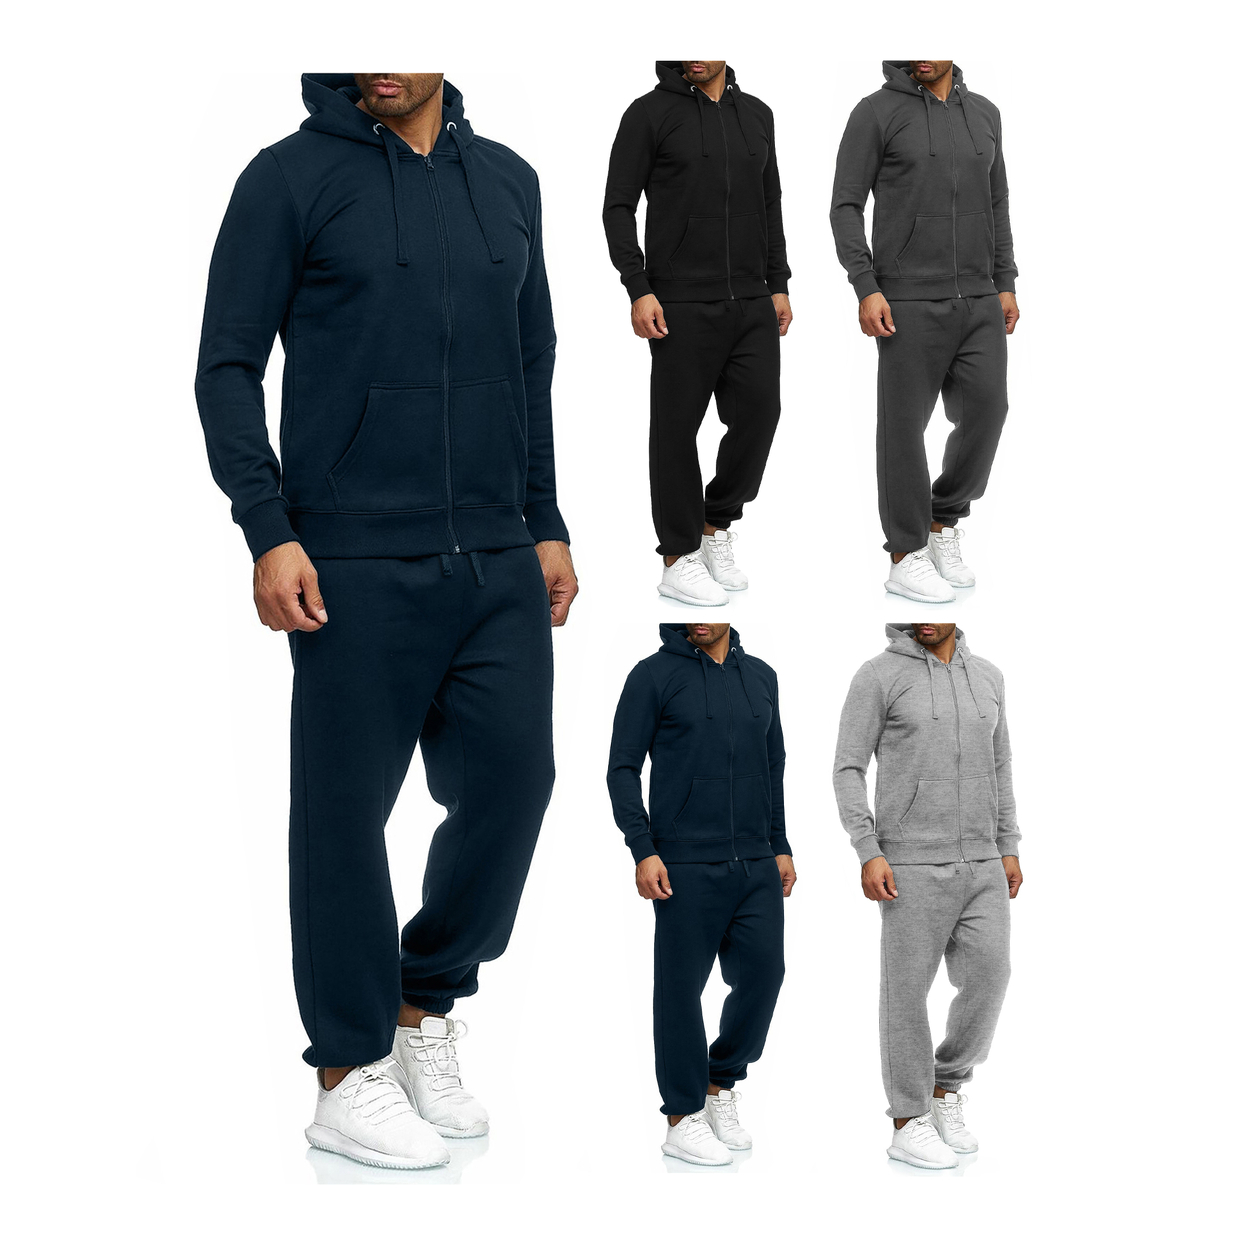 Men's Casual Big & Tall Athletic Active Winter Warm Fleece Lined Full Zip Tracksuit Jogger Set - Black, Small